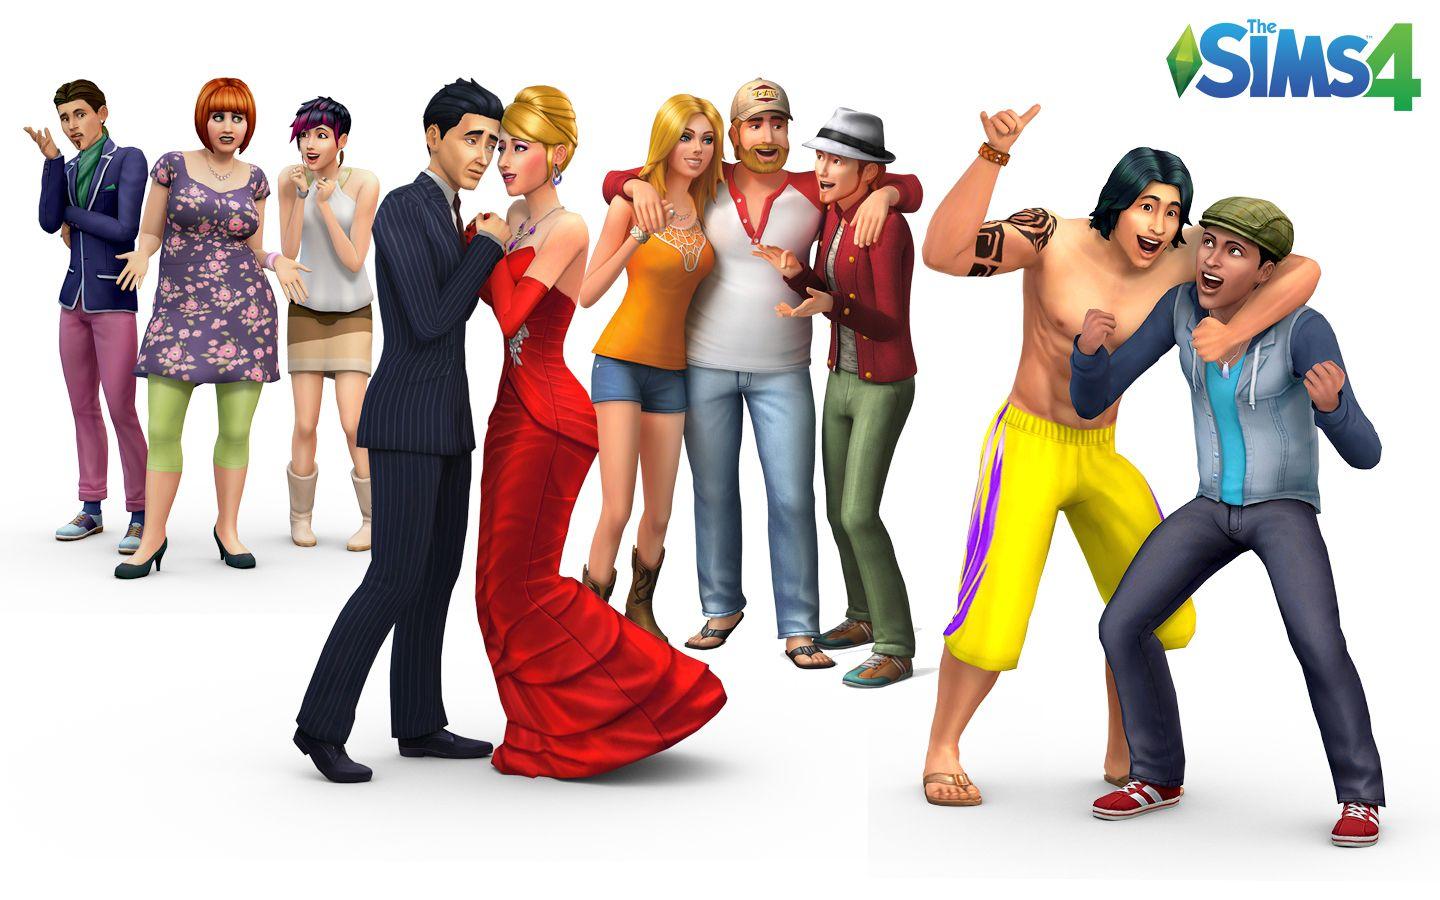 Share The Sims 4 Wallpaper!. Sims Community Social